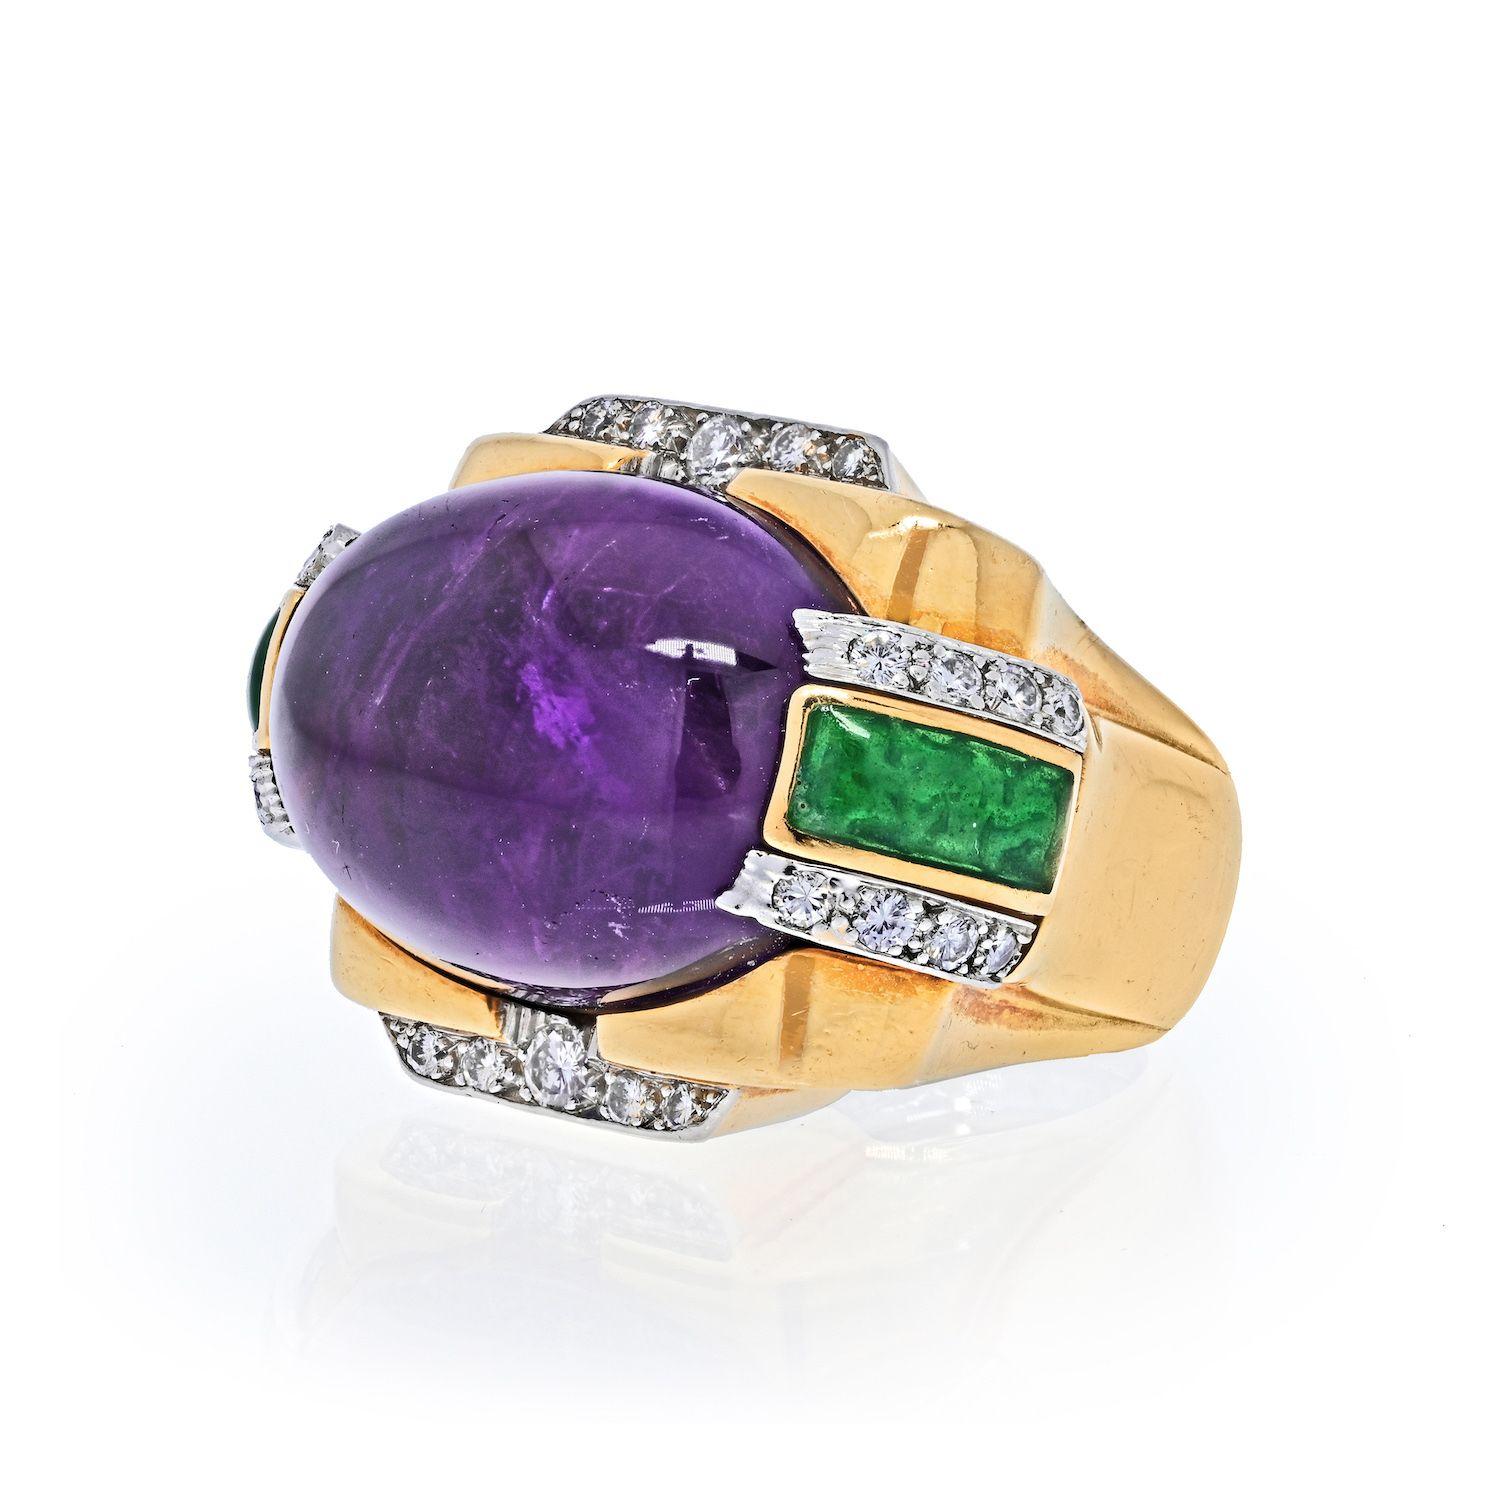 Famous for his bold use of color and his extraordinary statement jewels, David Webb also made beautiful pieces for everyday wear. The ring centers on an oval cabochon amethyst surrounded by round brilliant-cut diamonds and accented by green enamel.